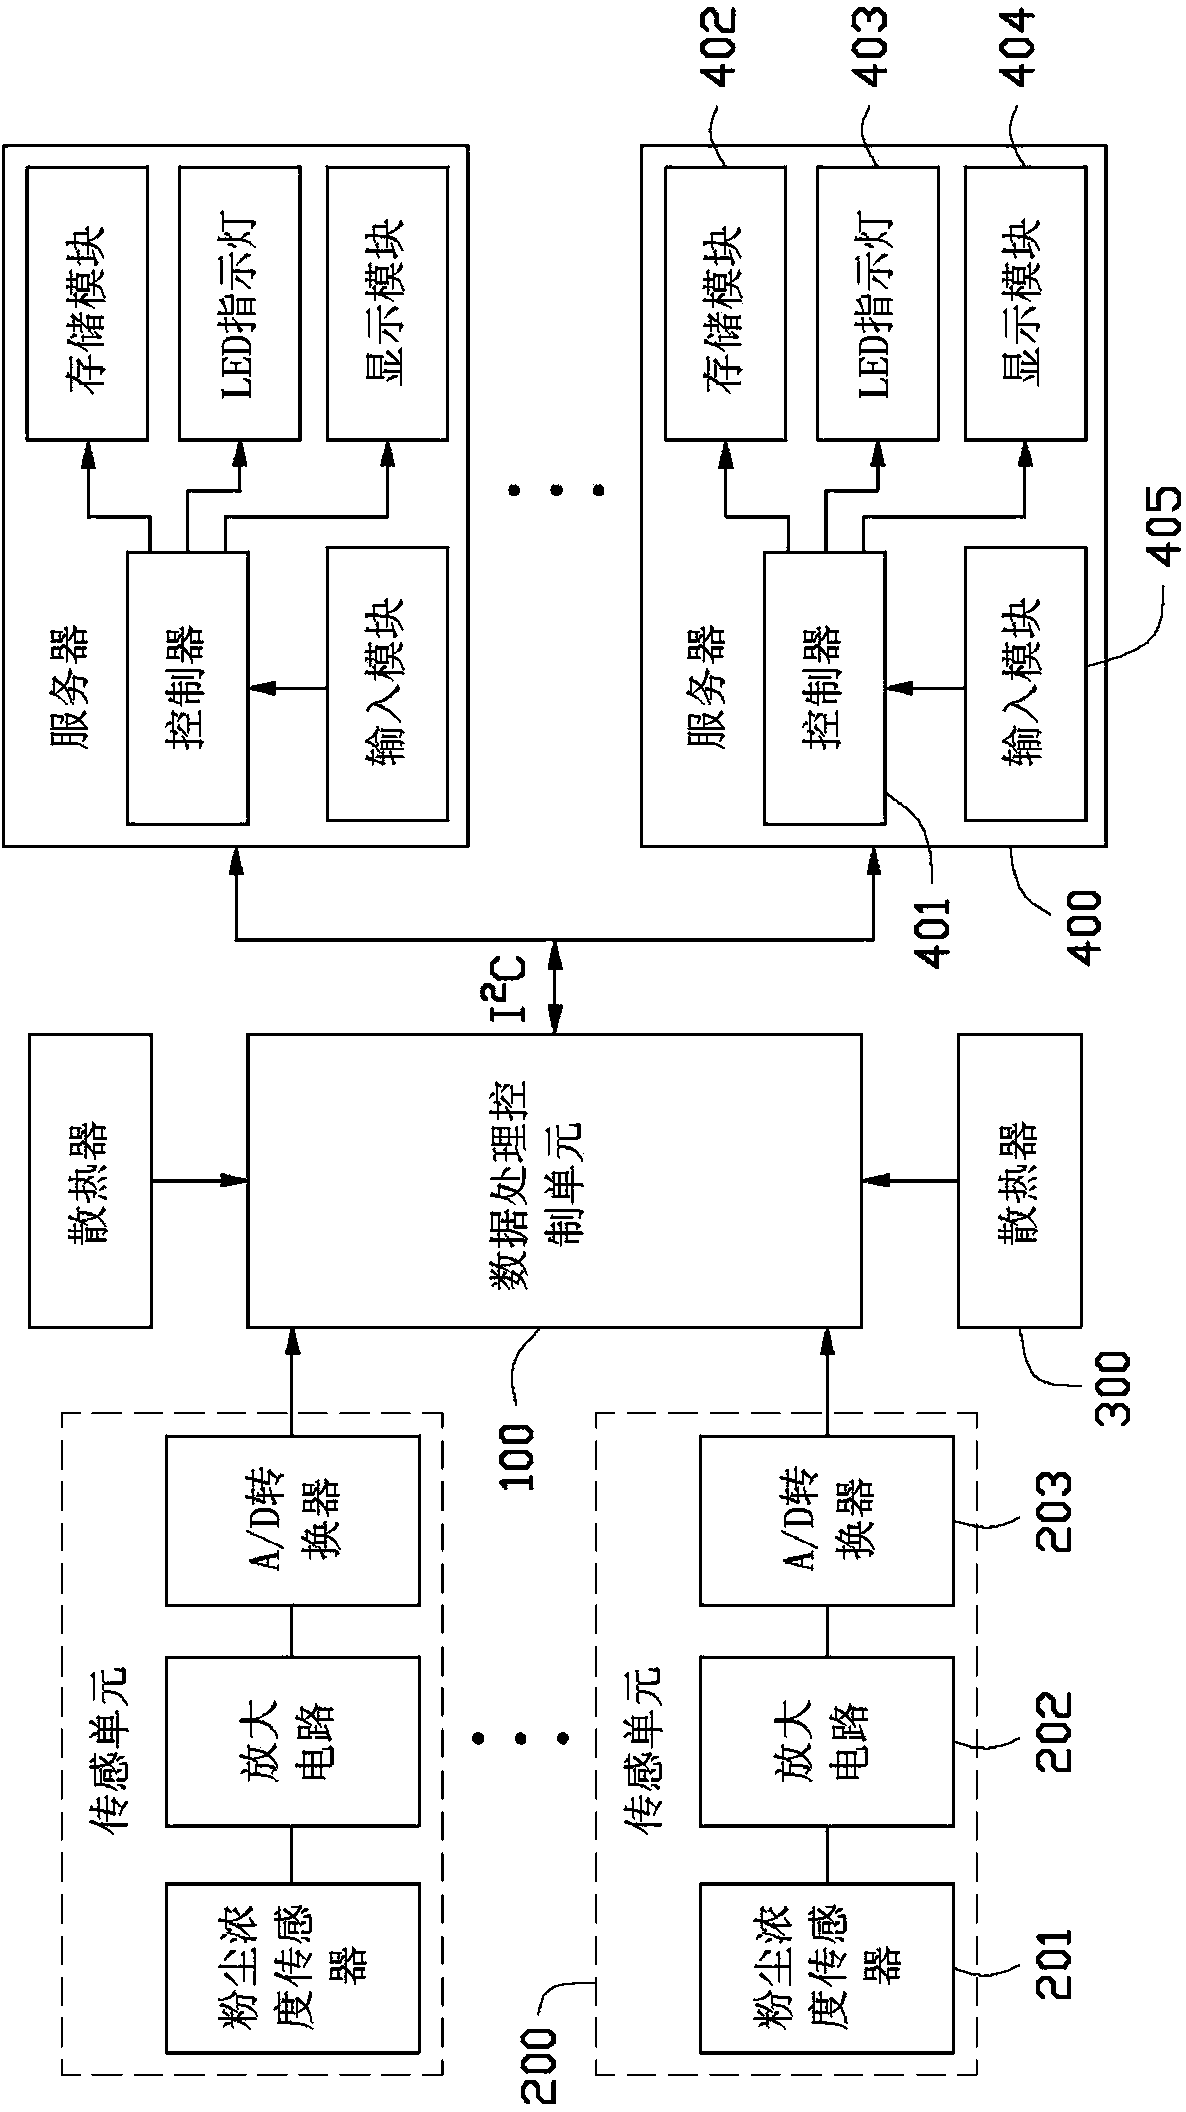 Server dust monitoring system and method